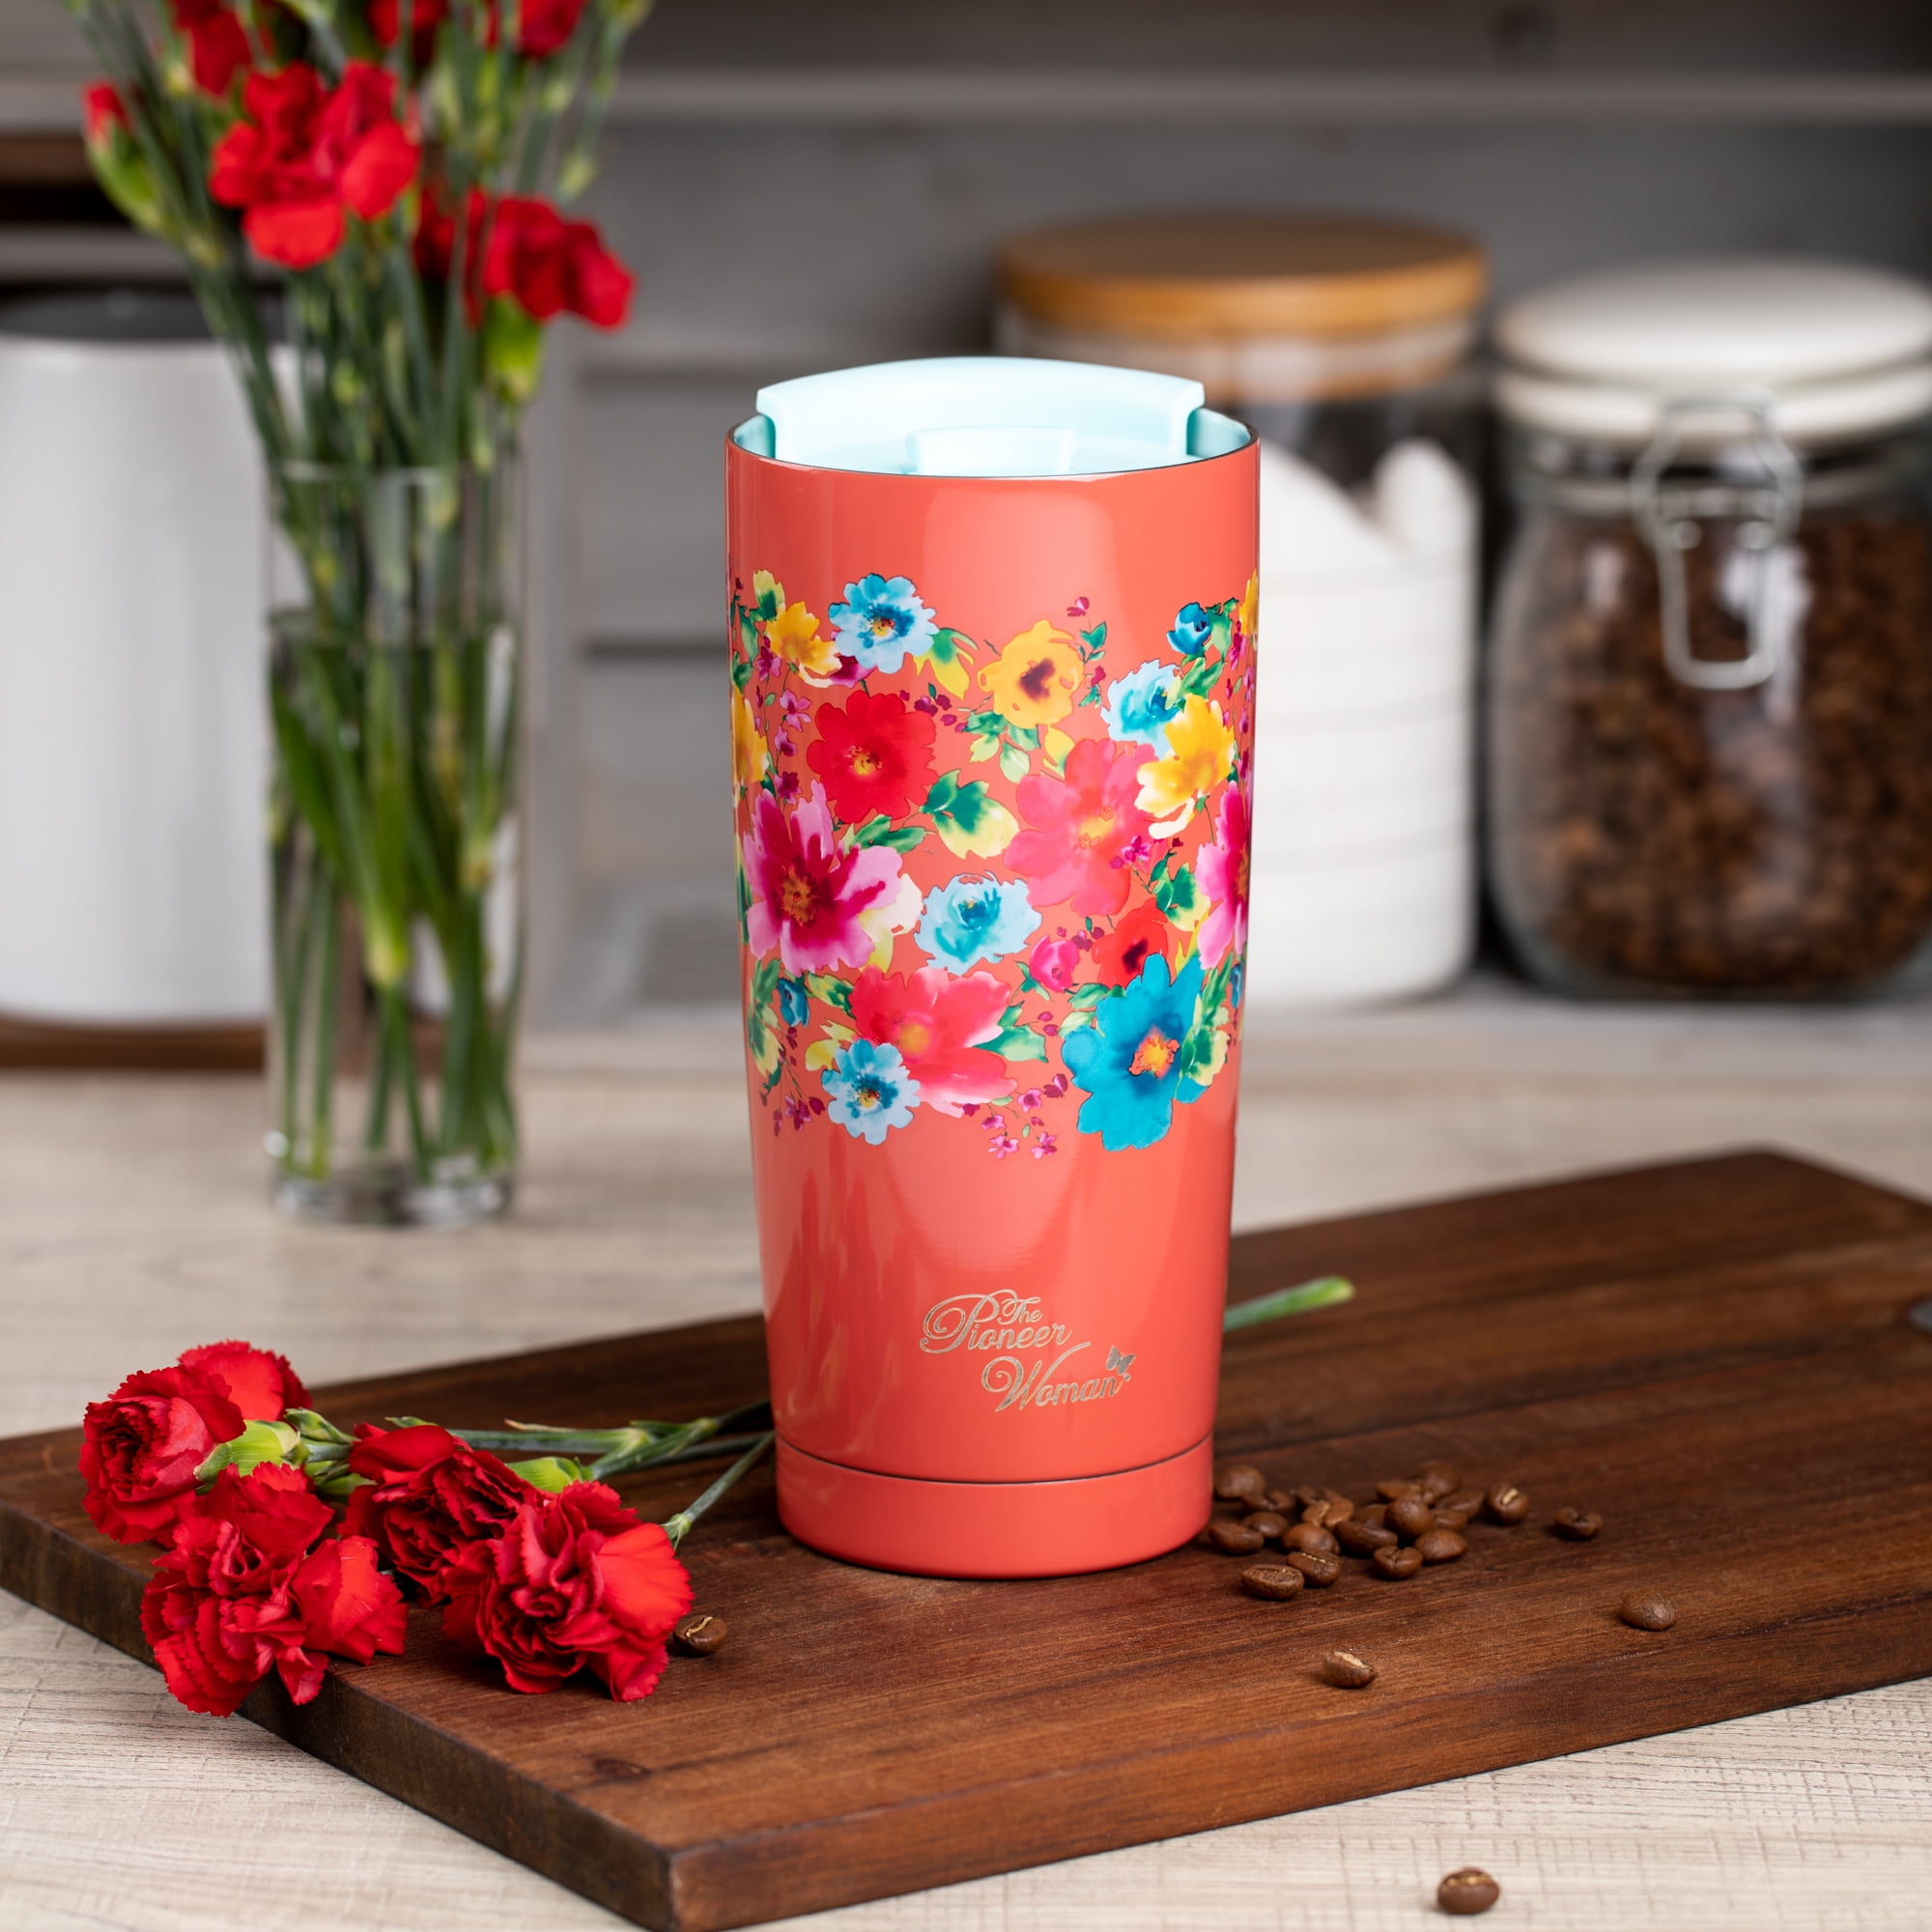 The Pioneer Woman Travel Drinkware at Walmart - Where to Buy Ree Drummond's  Reusable Mugs and Cups